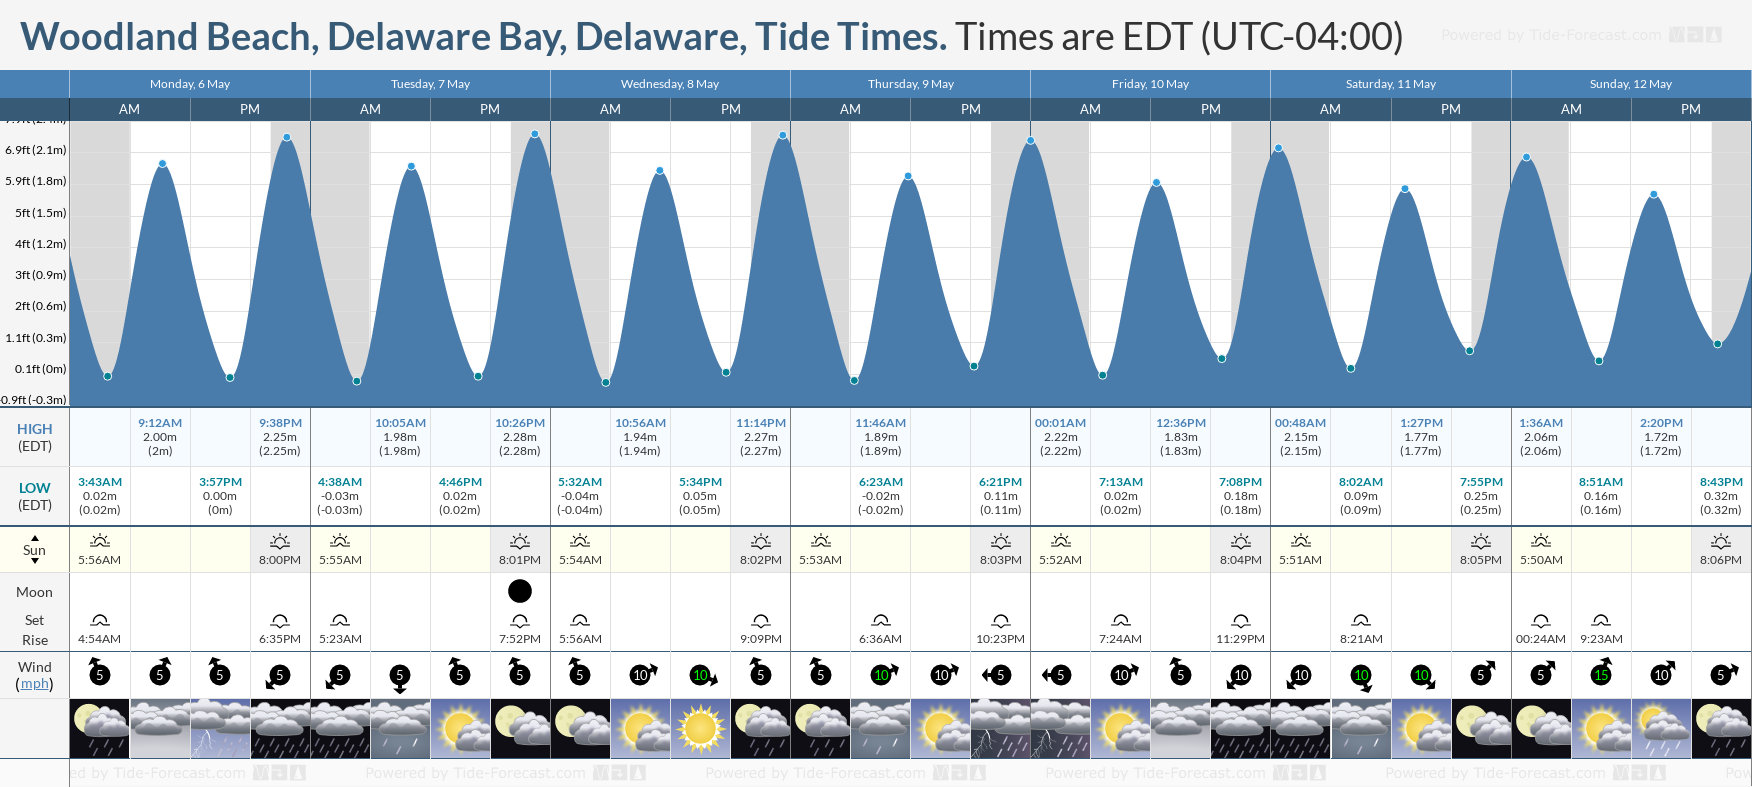 Woodland Beach, Delaware Bay, Delaware Tide Chart including high and low tide times for the next 7 days